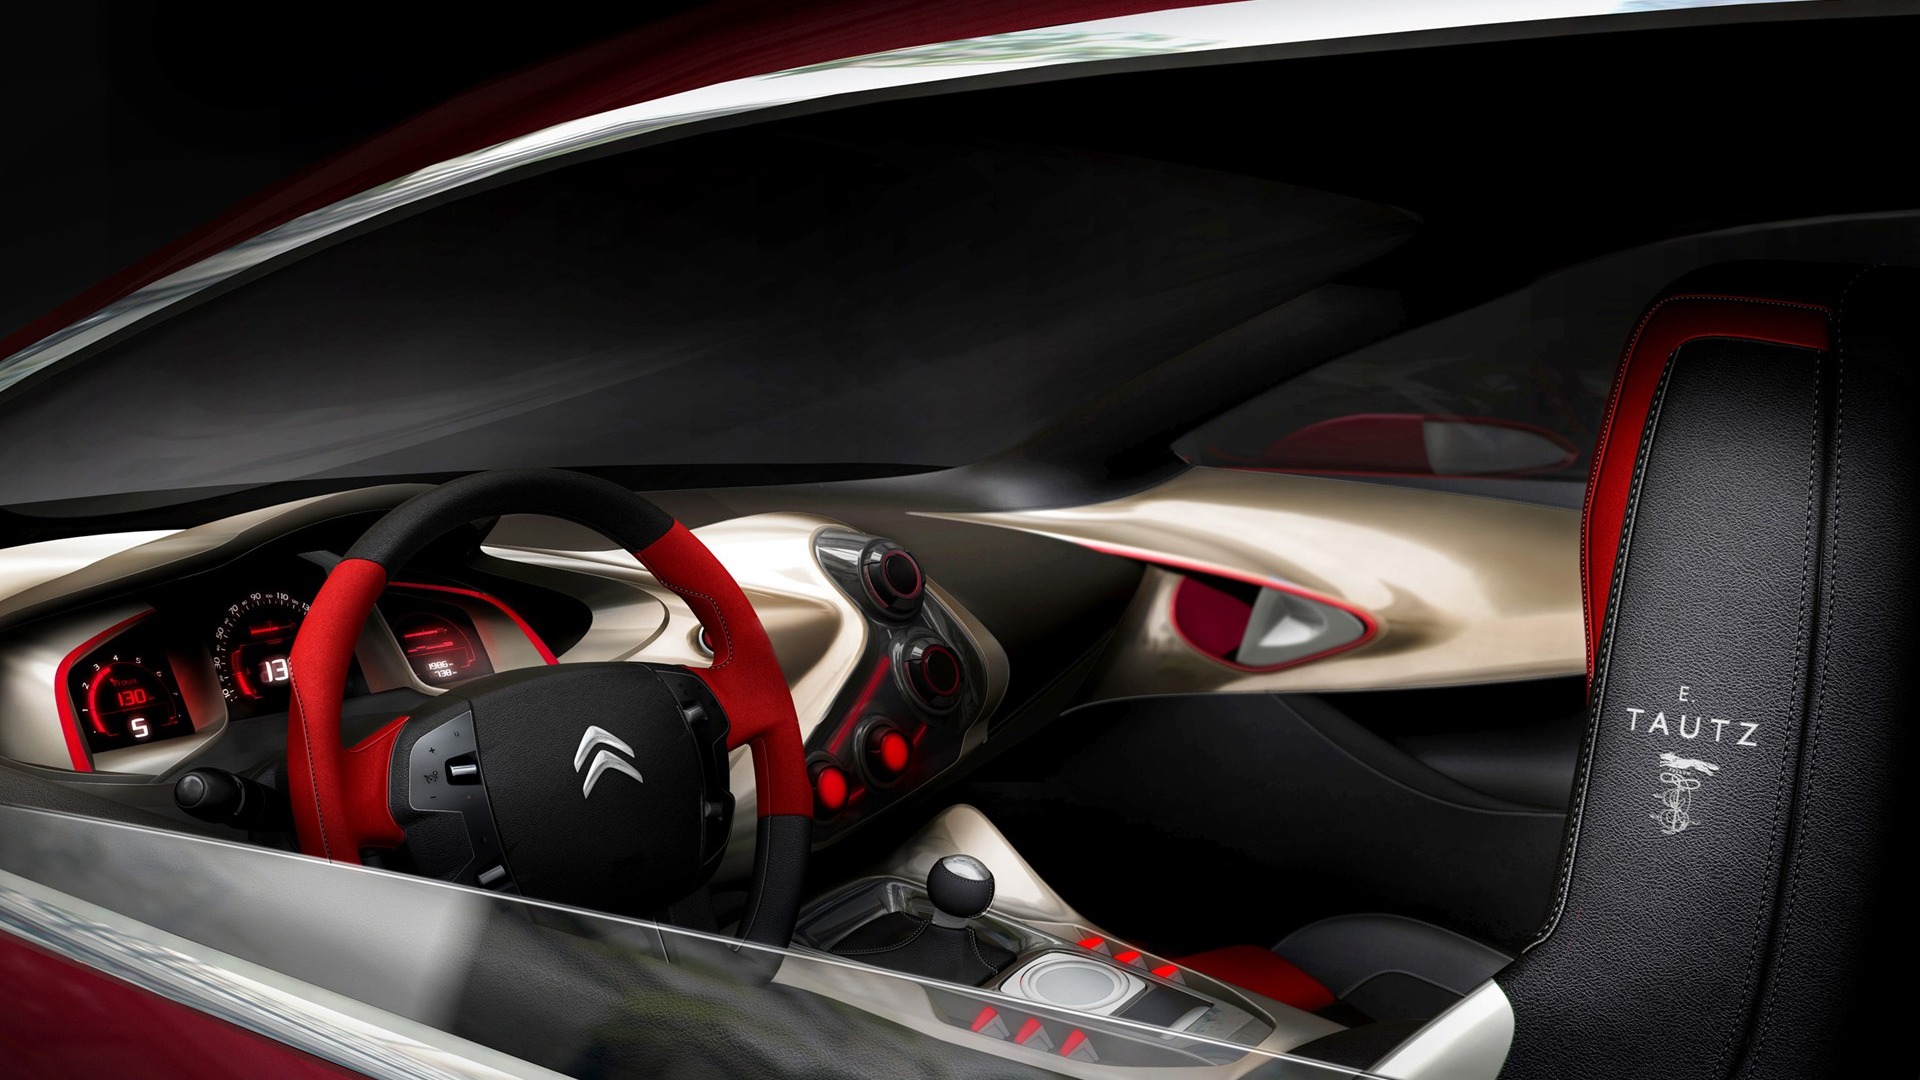 Special edition of concept cars wallpaper (5) #5 - 1920x1080